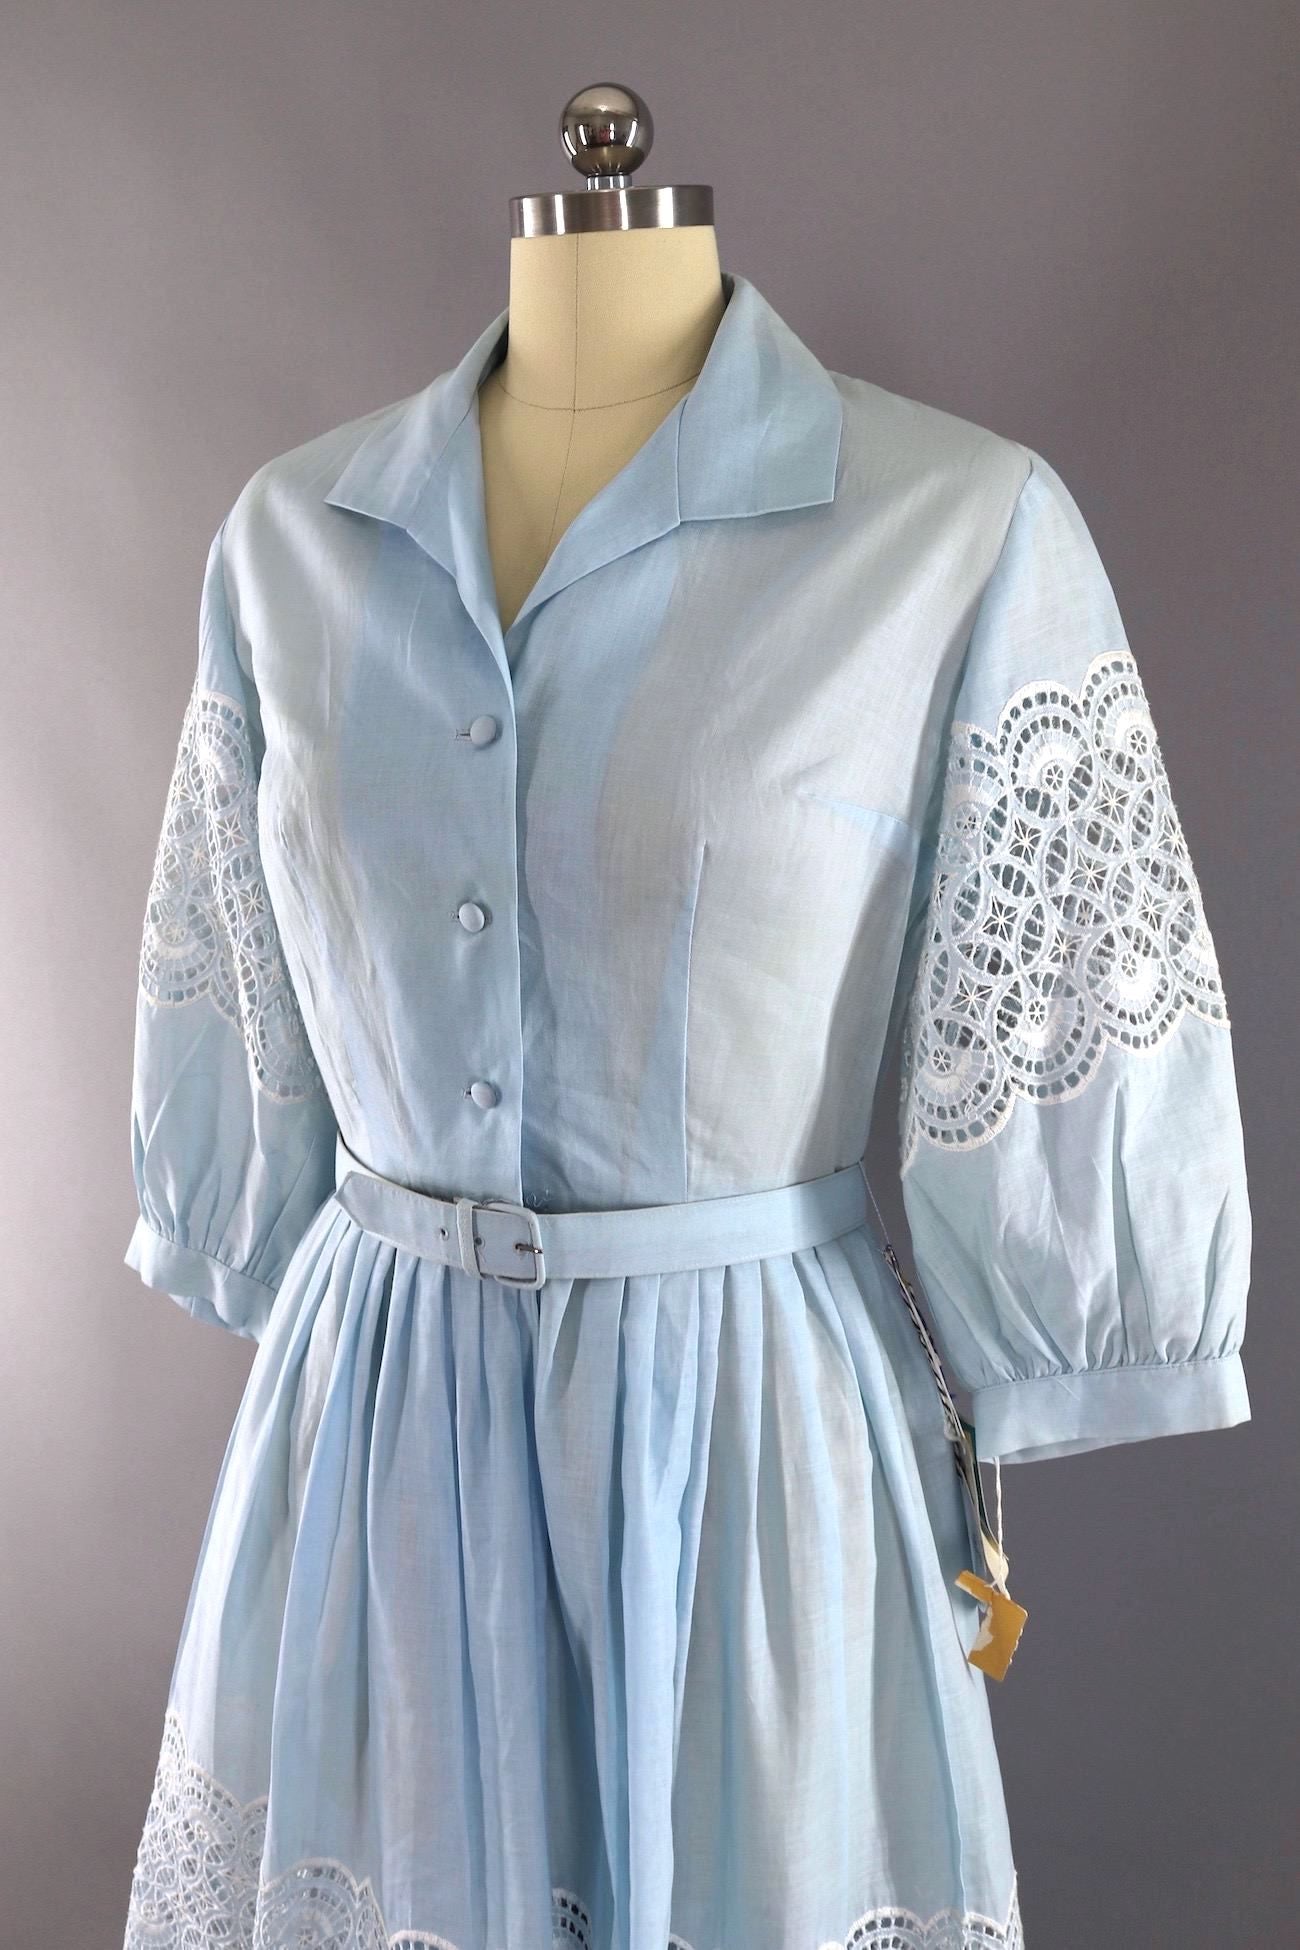 Vintage 1950s Sky Blue Cotton Lace Day Dress / Deadstock NOS Original Tags - ThisBlueBird